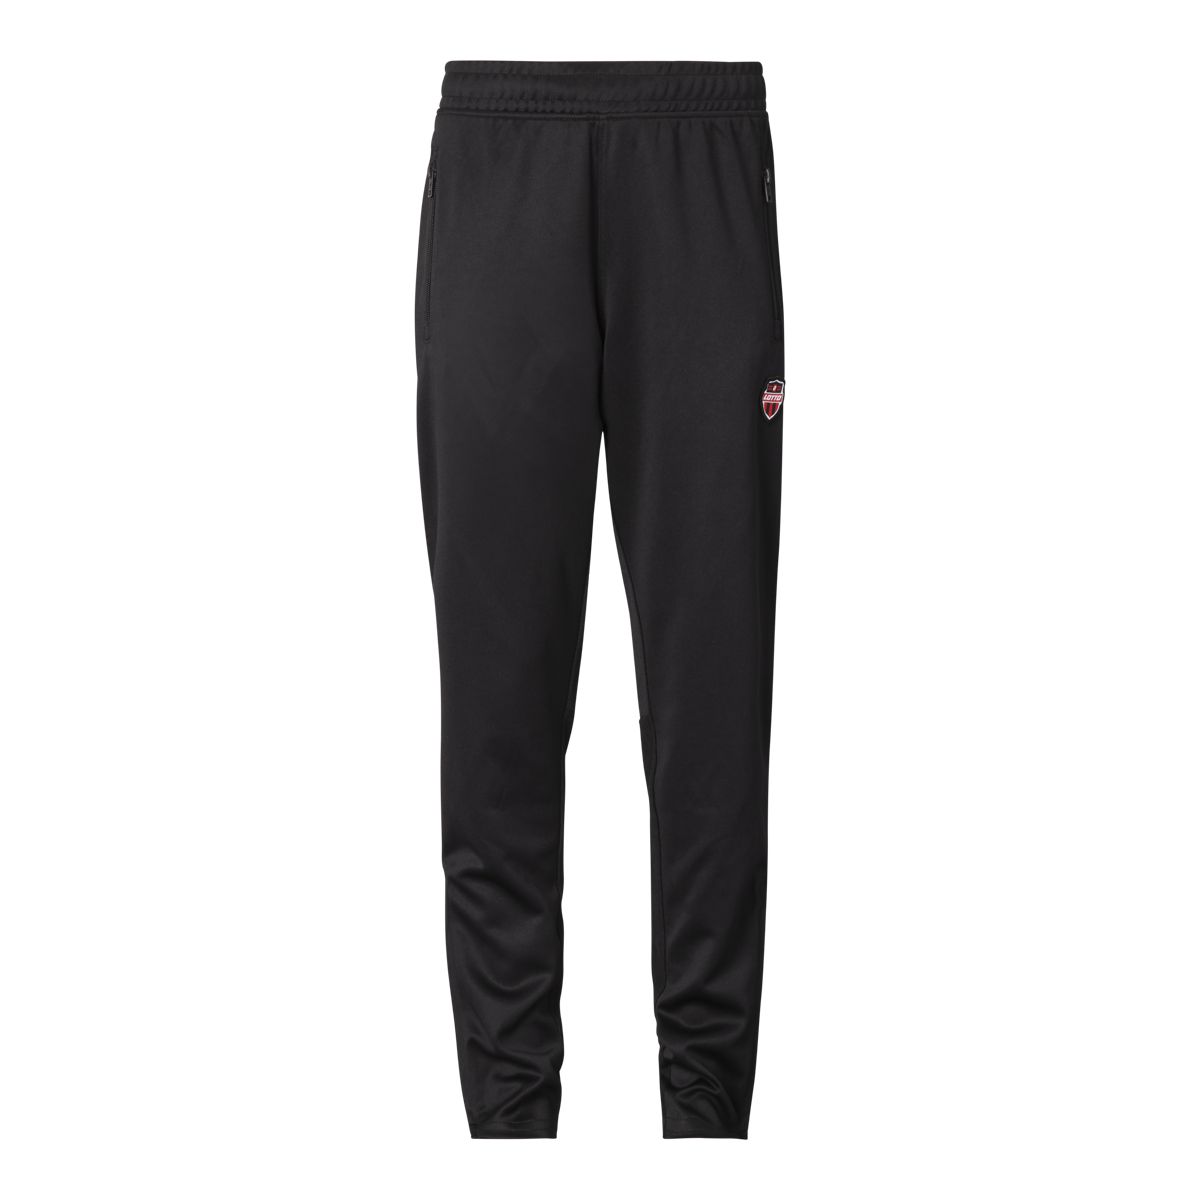 Lotto Boys' Tapered Soccer Track Pants Kids' Training